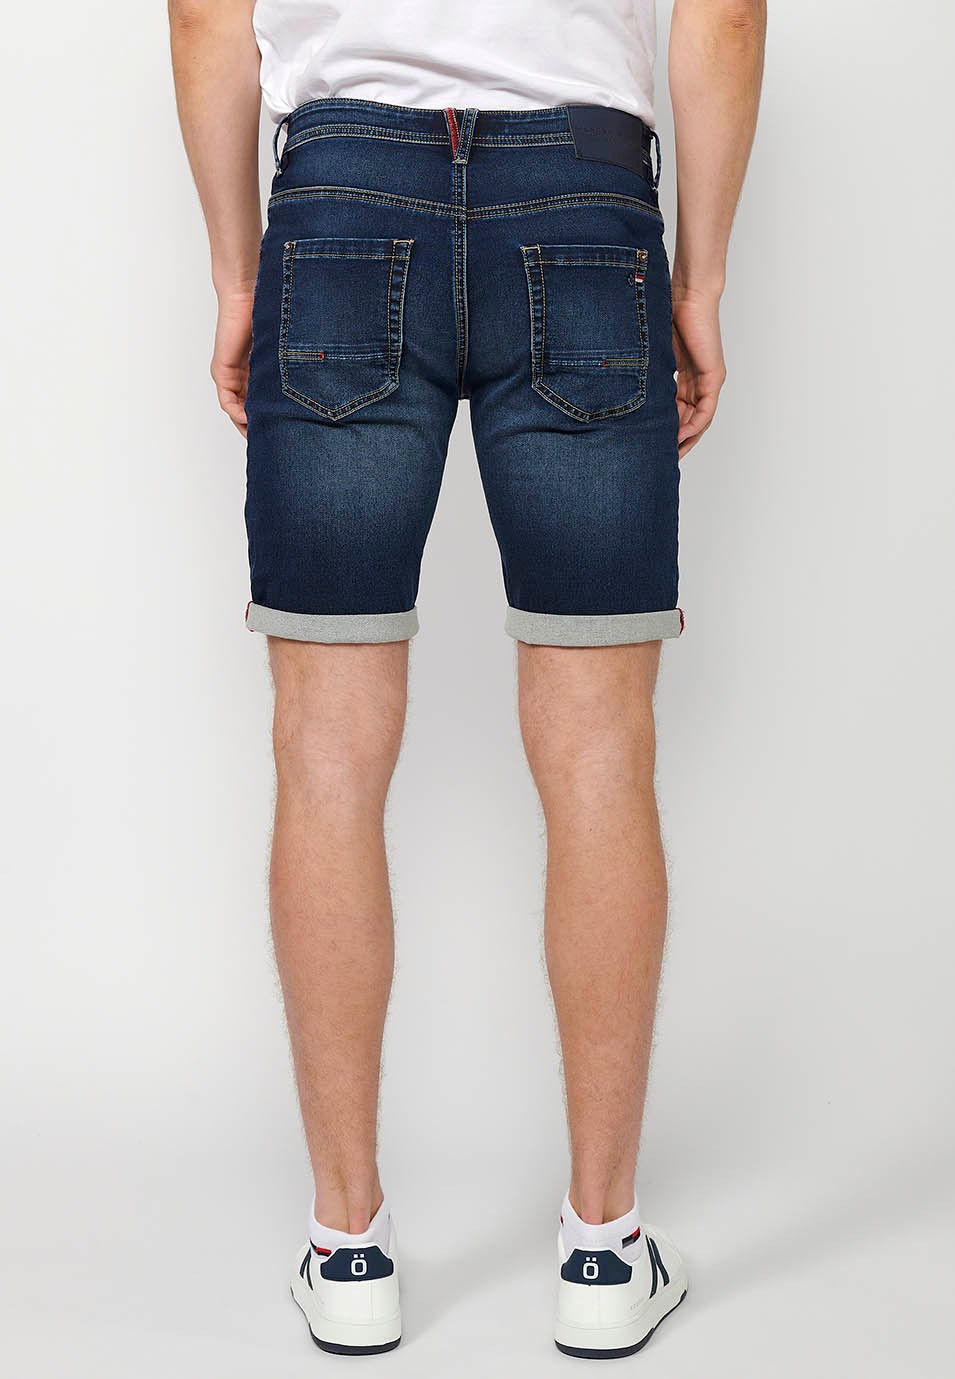 Shorts with turn-up finish with front closure with zipper and button in Blue for Men 1